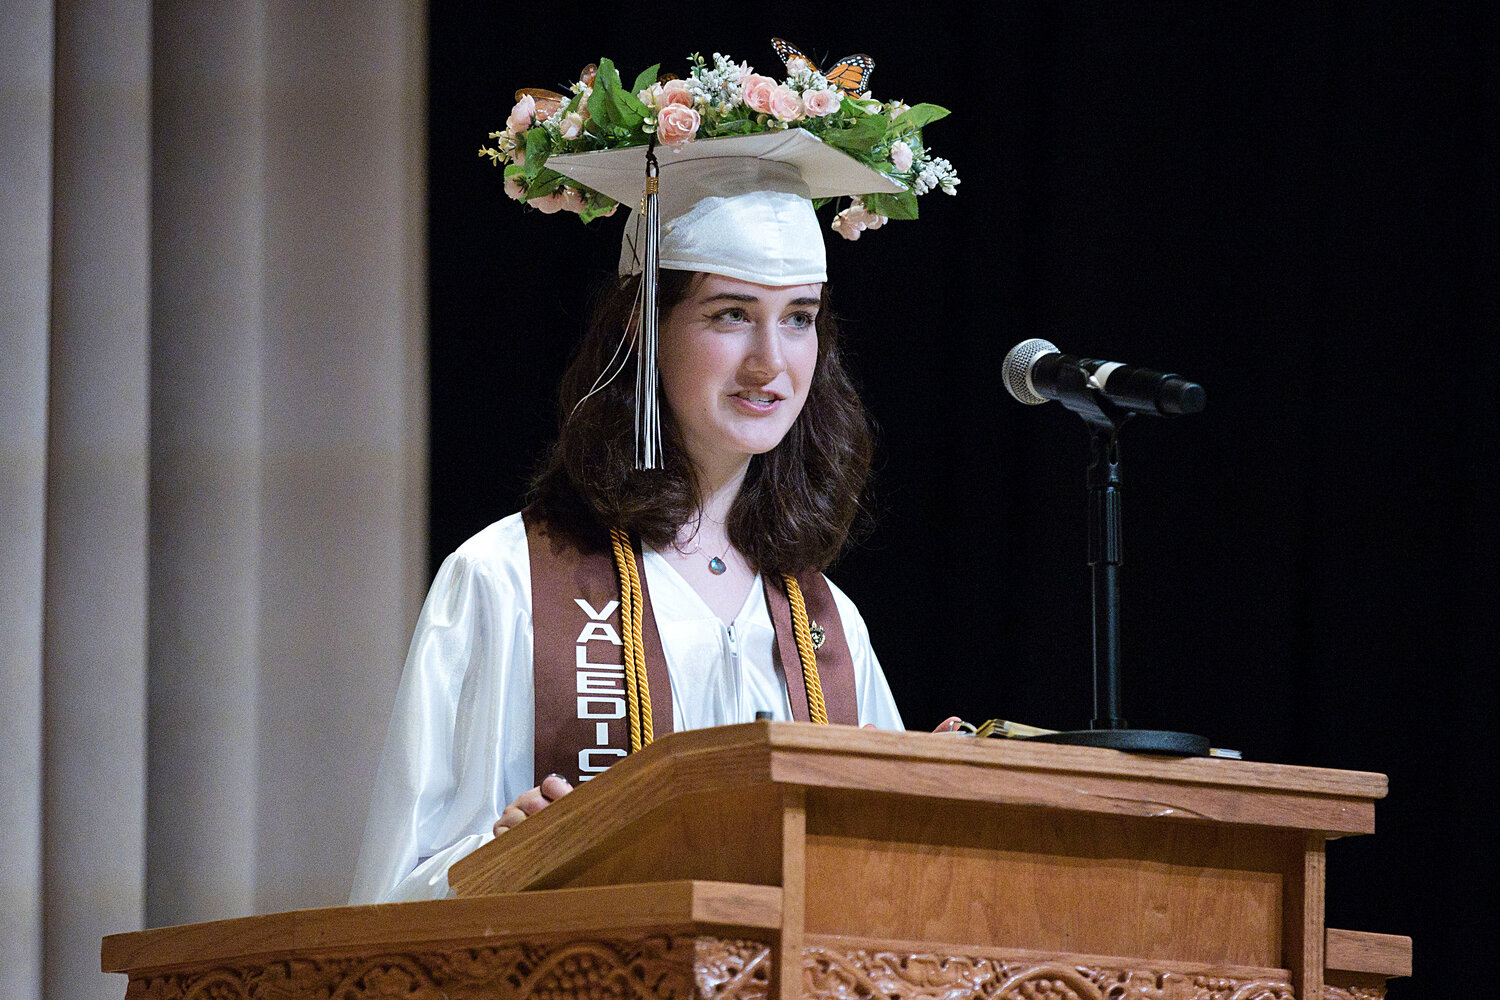 Valedictorian Lily MacDonald said this year's graduating class endured a lot but came through it all with a tight bond.